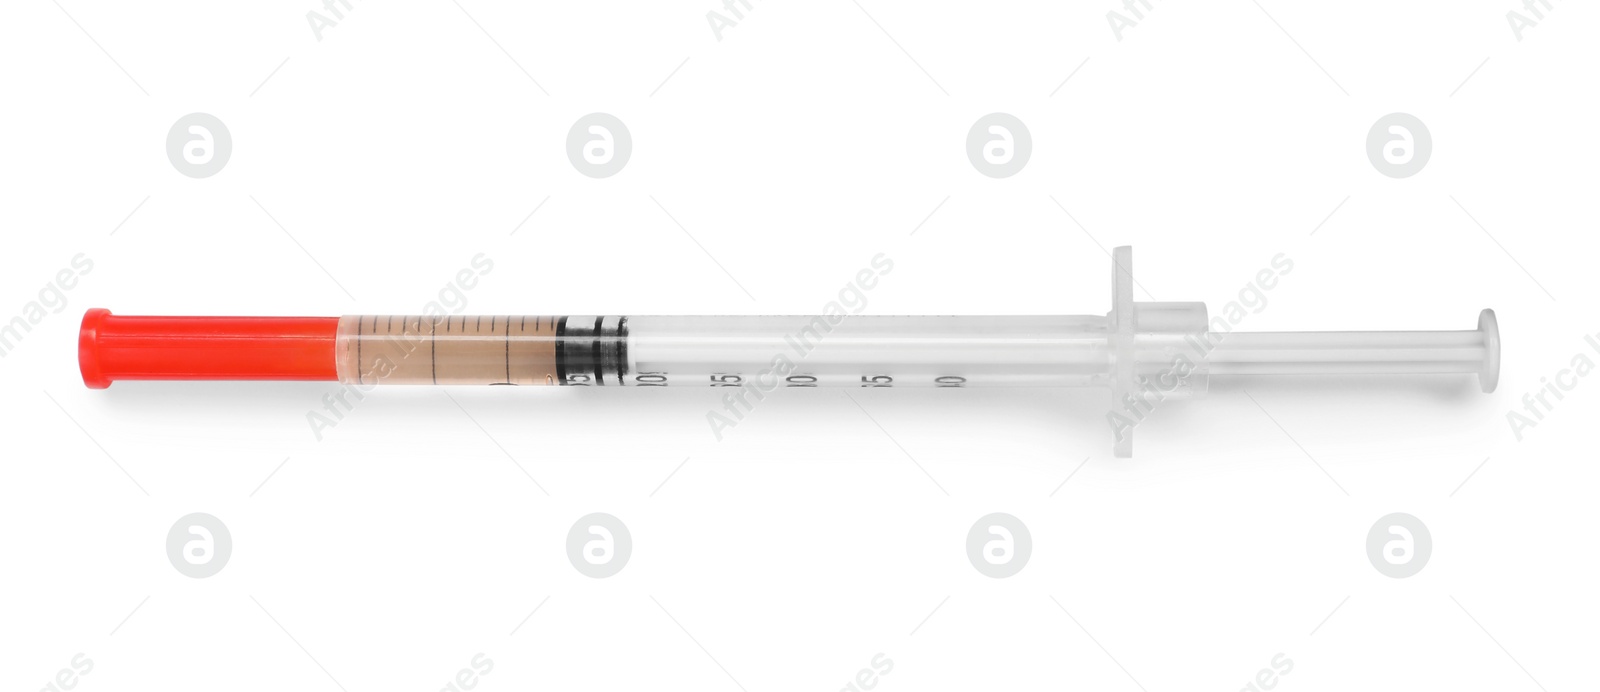 Photo of Syringe on white background, top view. Medical treatment